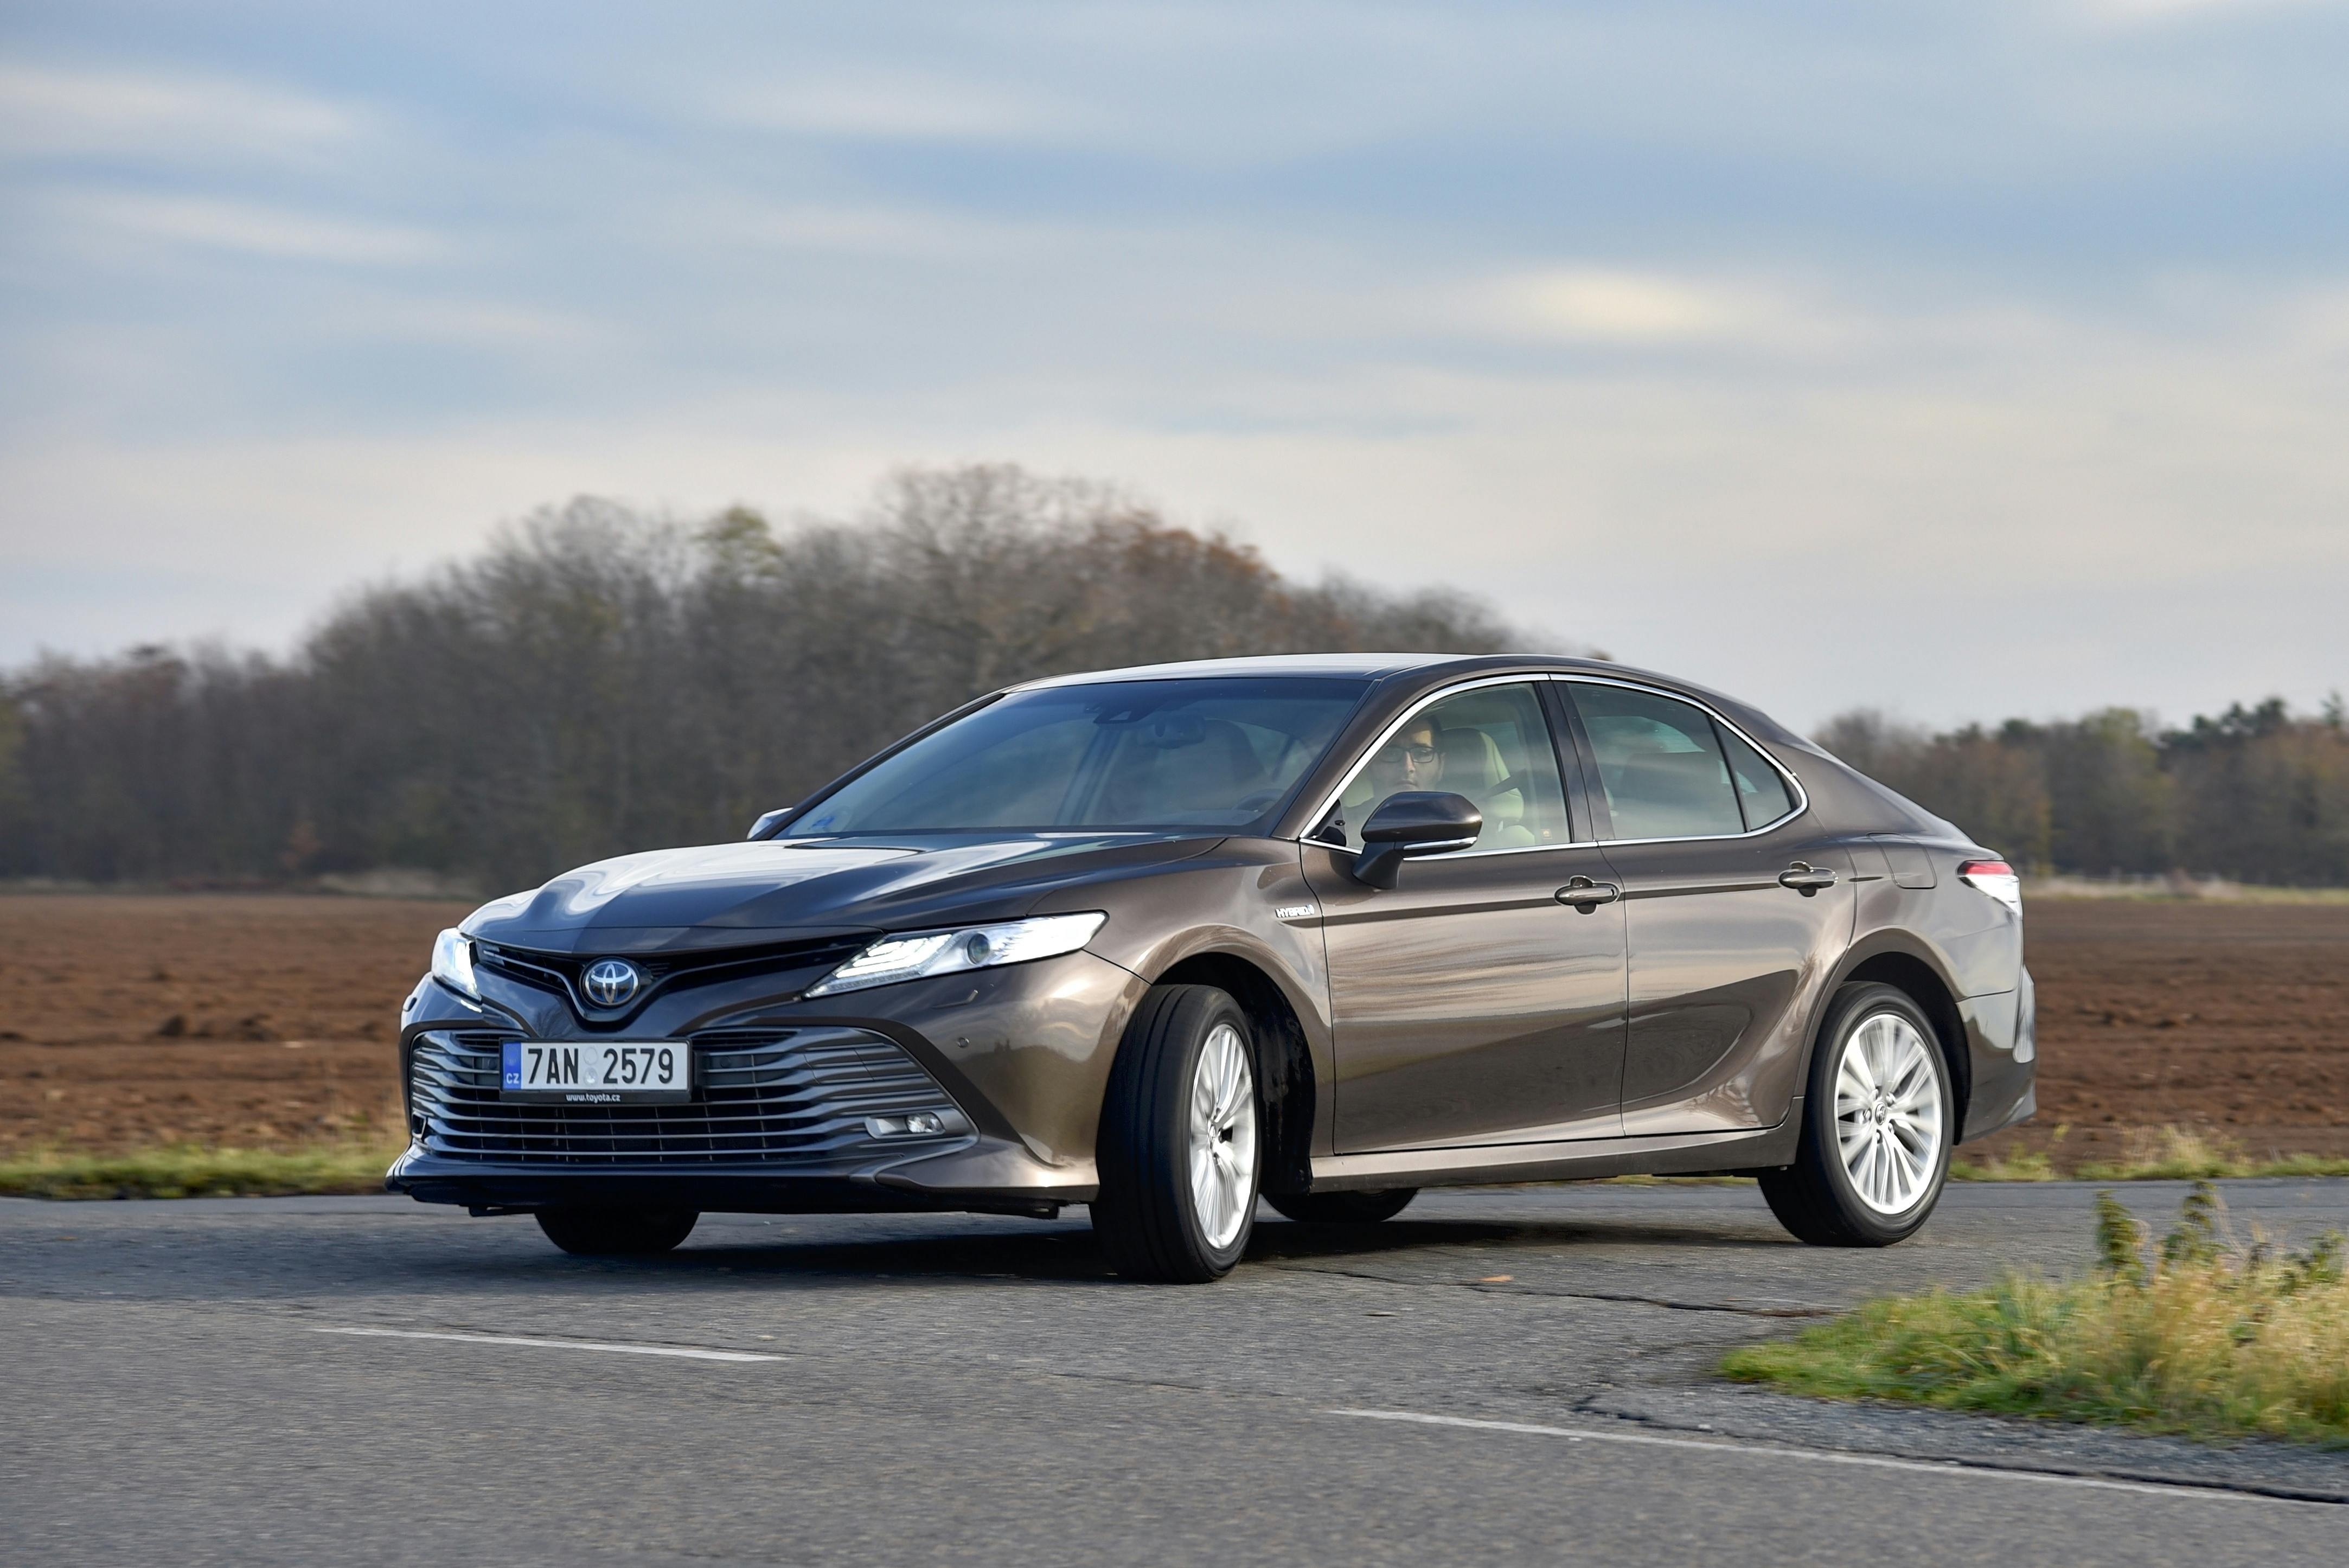 Toyota Camry - hybrid. Car while driving